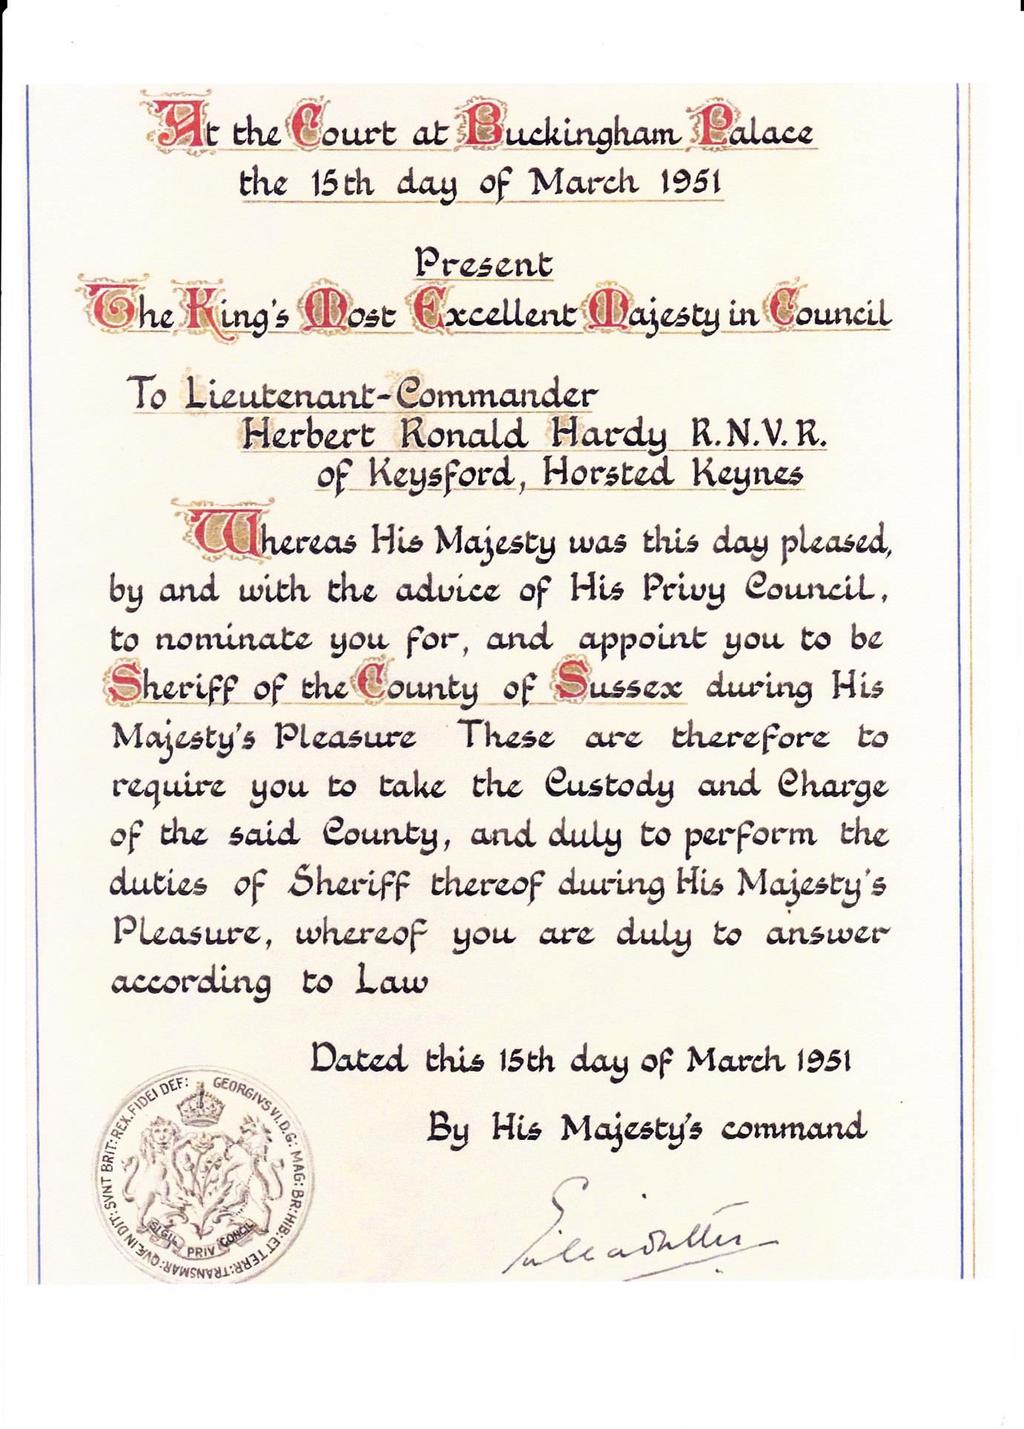 Document showing Royal